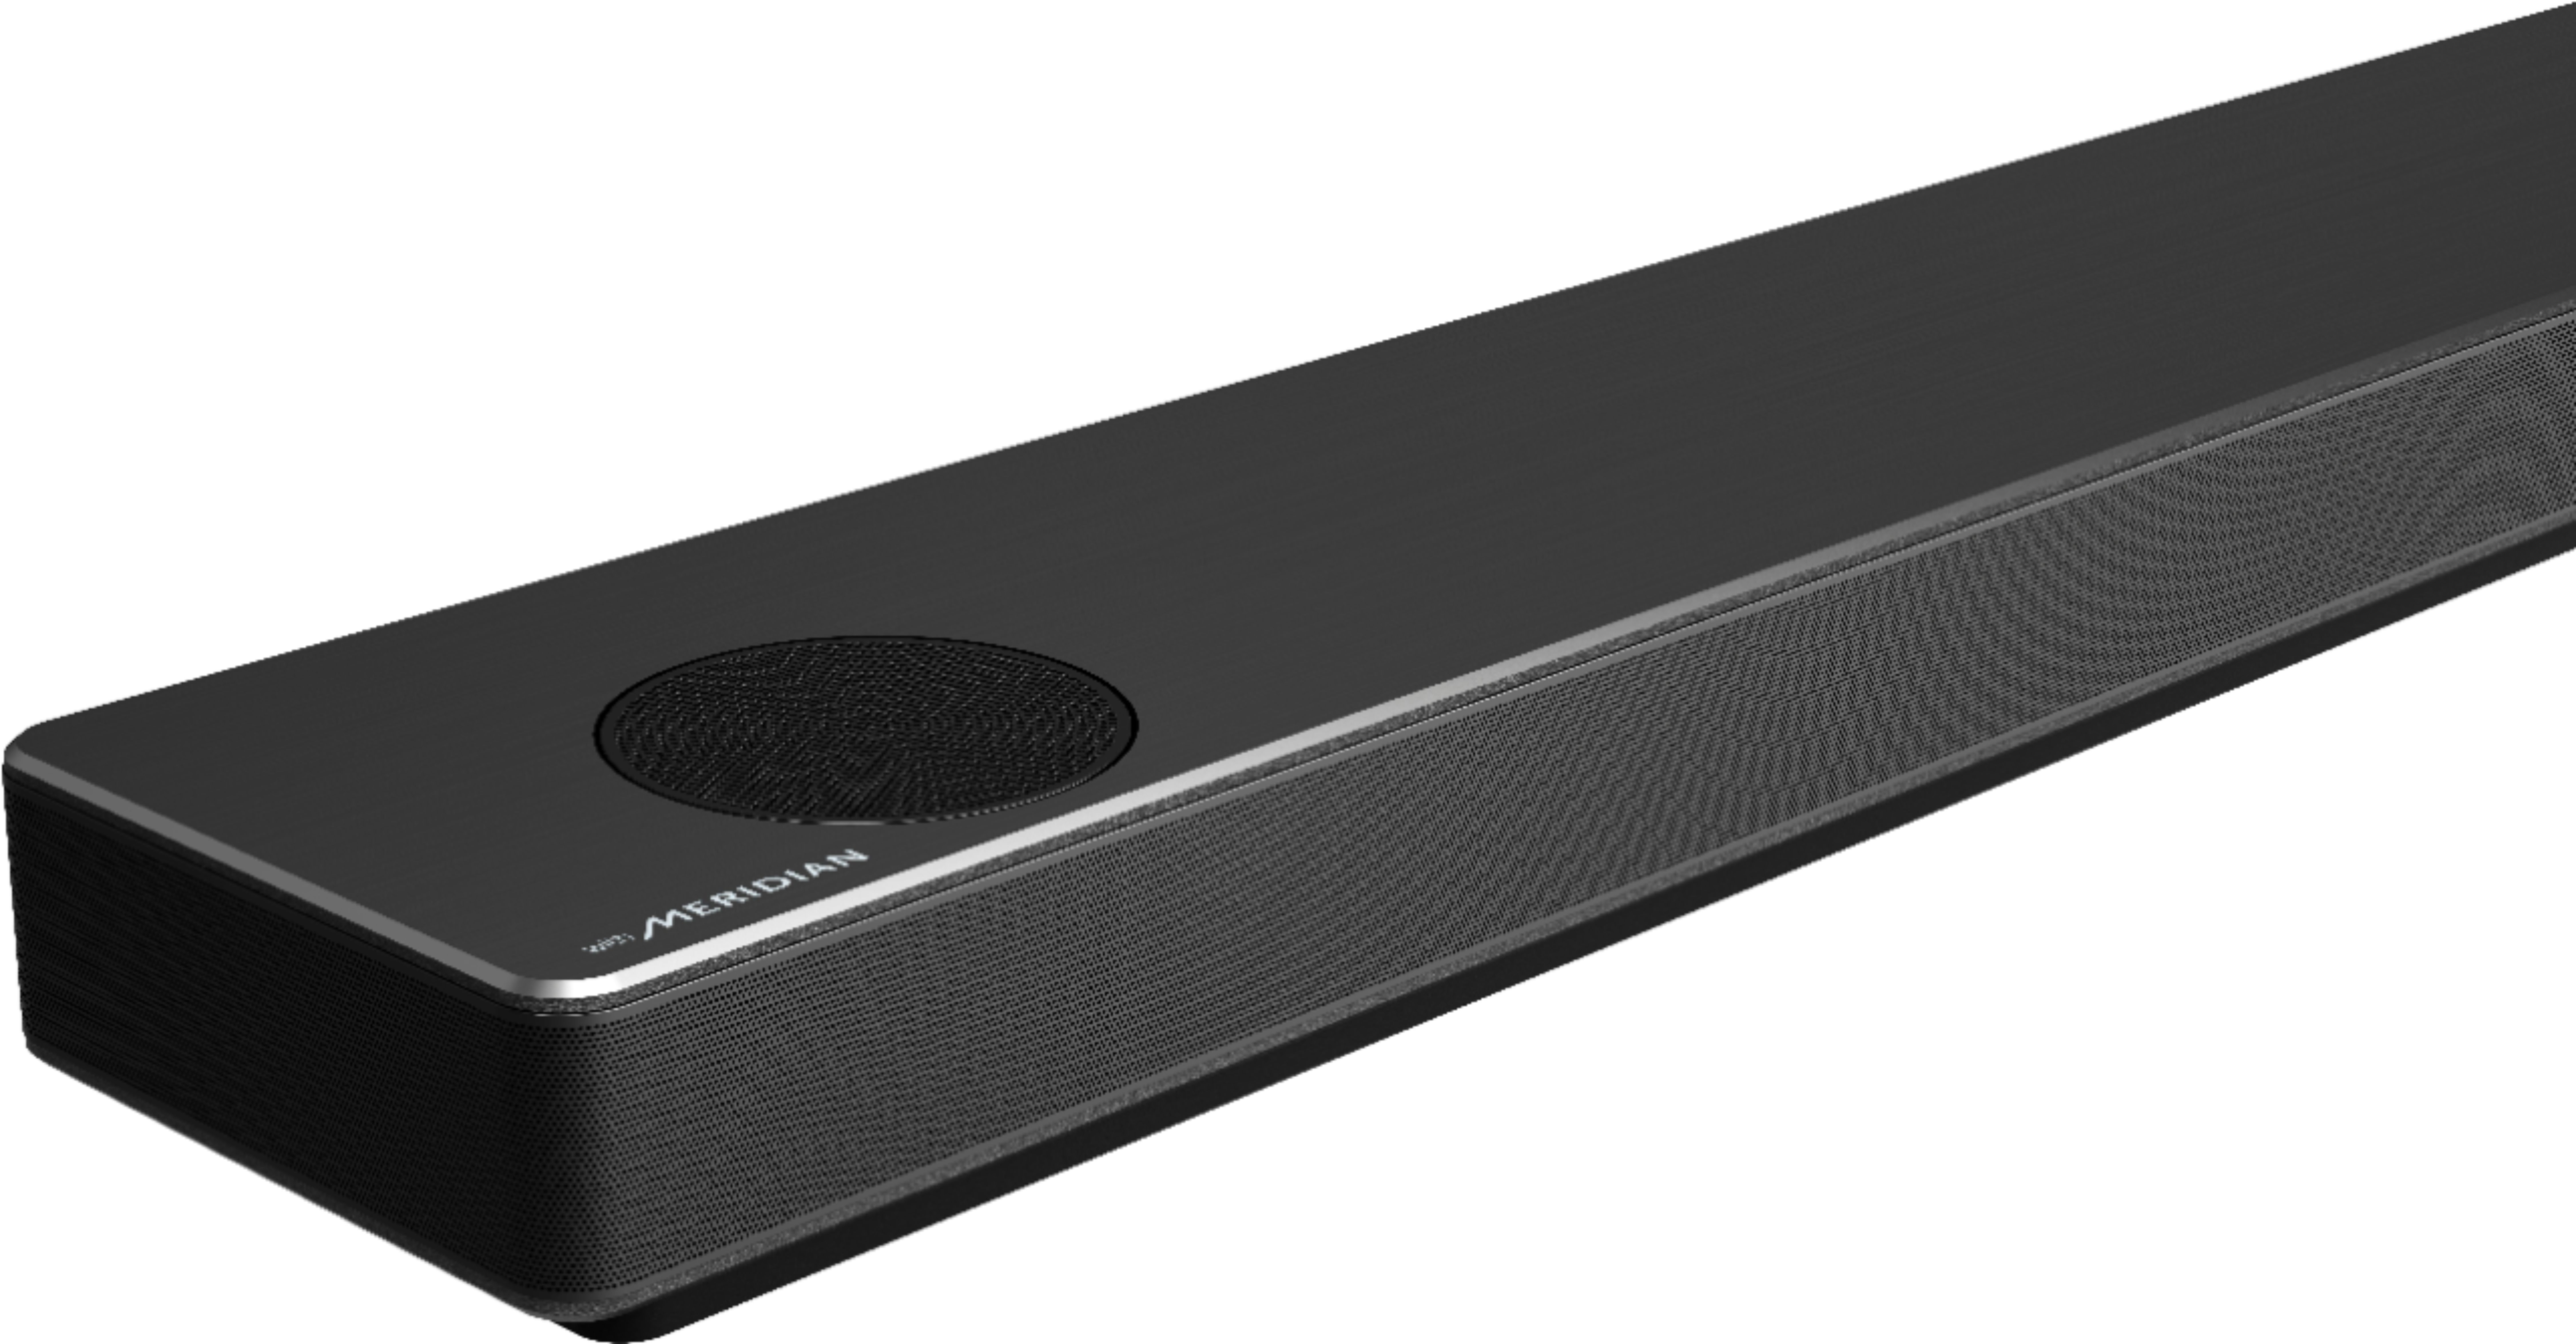 Buy: with LG 770W Black Subwoofer 7.1.4-Channel Dolby Assistant Atmos System Google and SN11RG with Best Wireless LG Soundbar